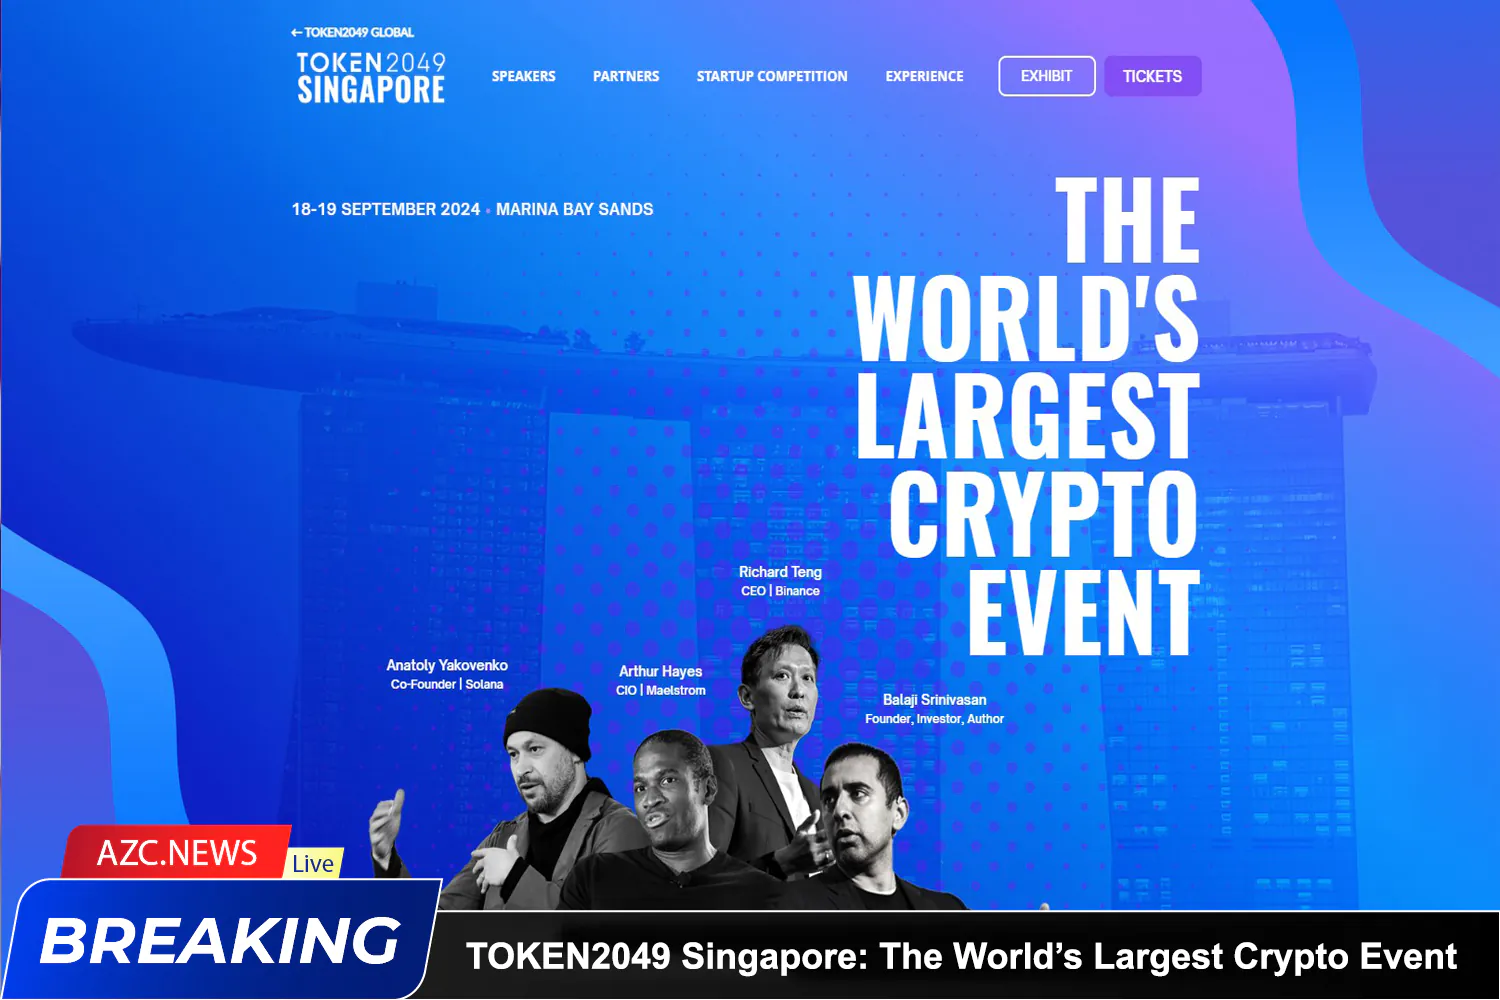 Azcnews Token2049 Singapore The World’s Largest Crypto Event